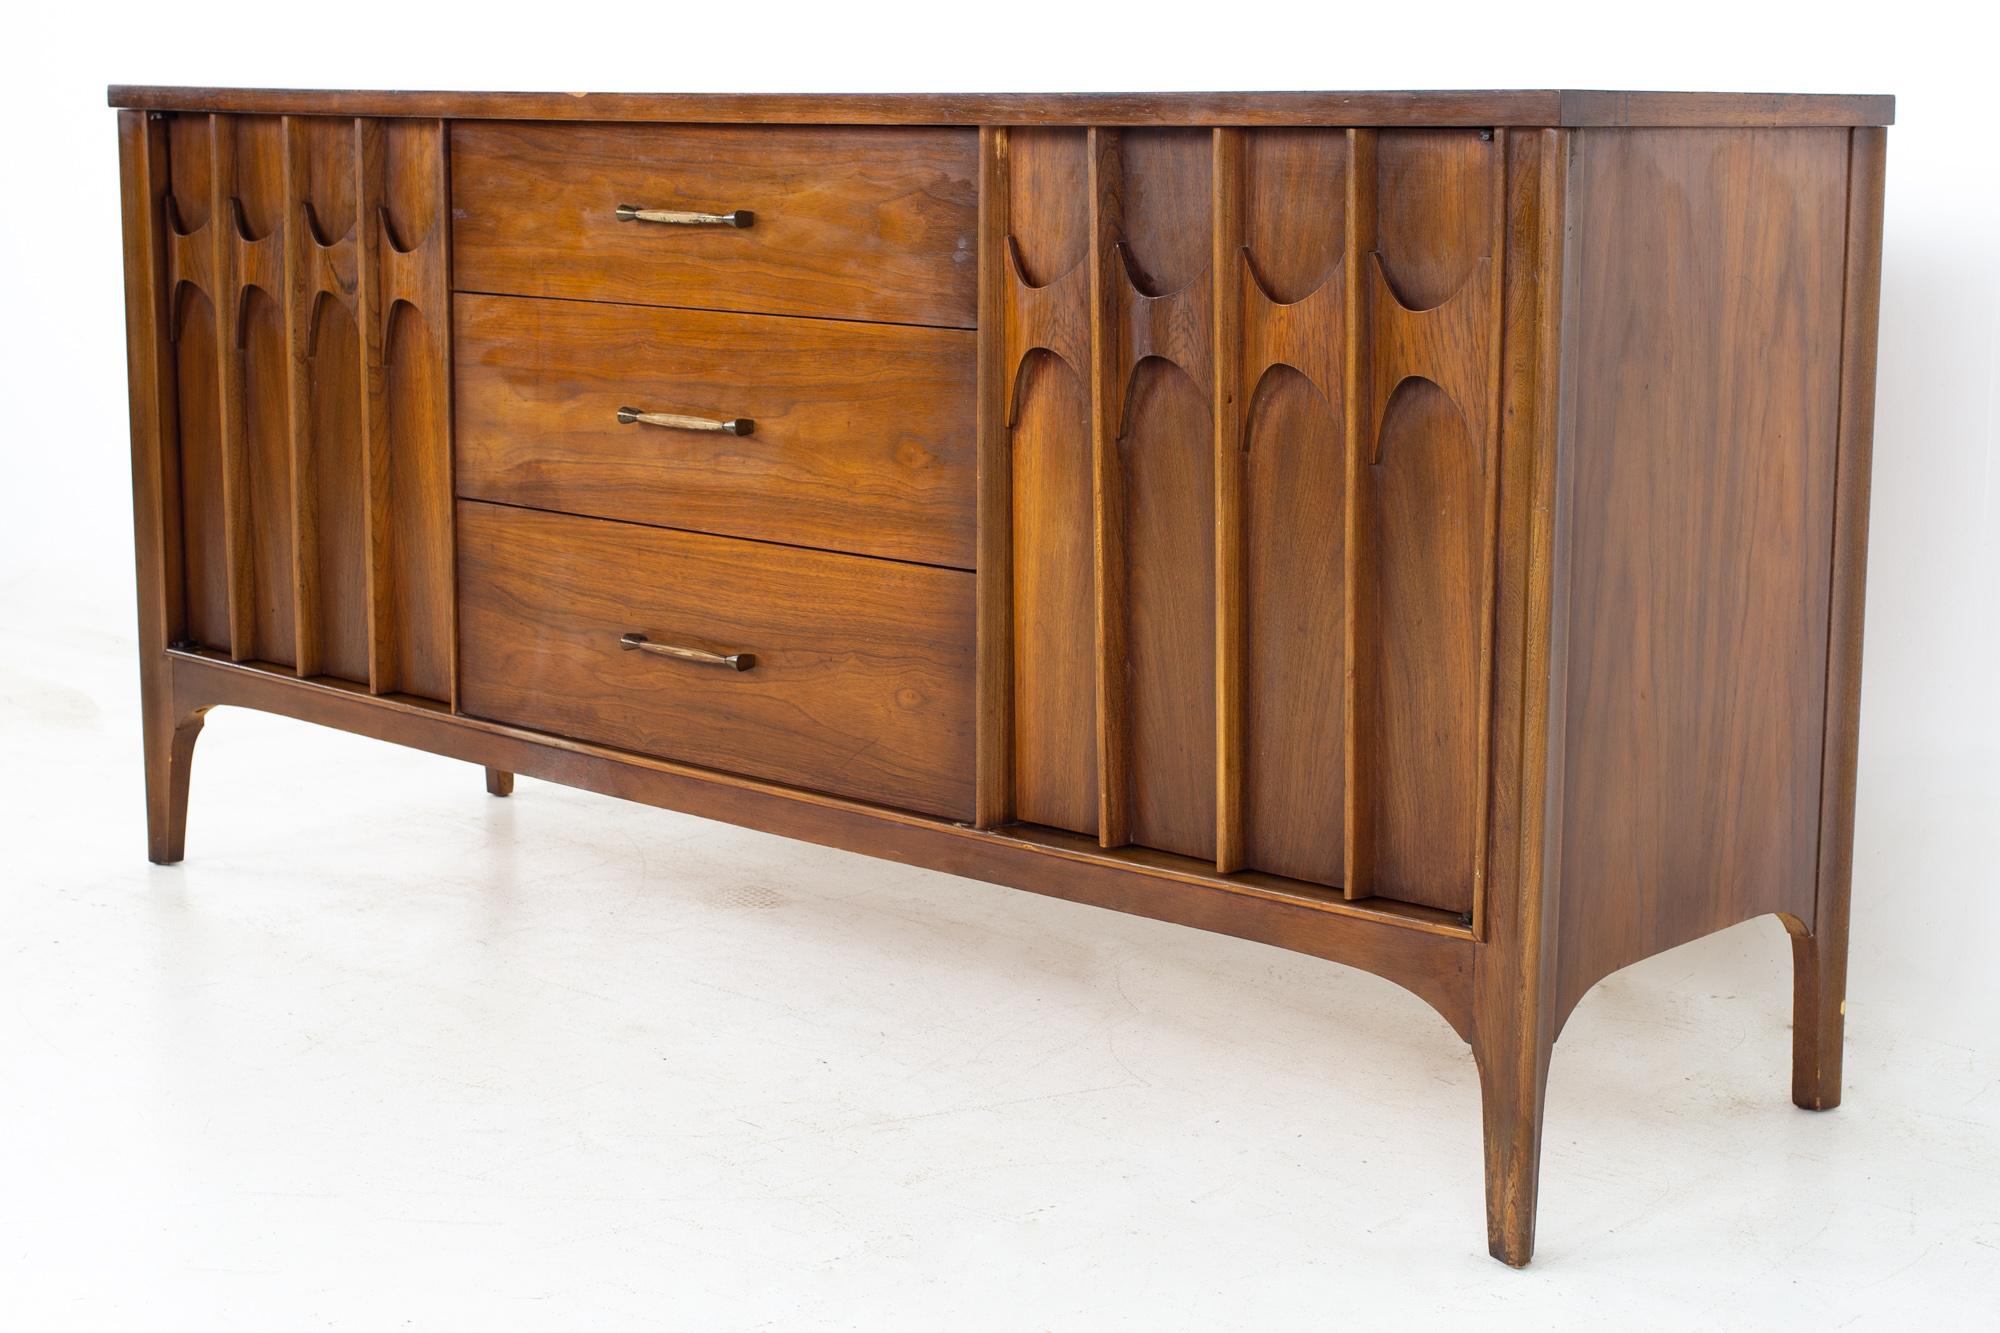 Kent Coffey Perspecta mid century walnut and rosewood sideboard buffet credenza.
Credenza measures: 65.25 wide x 18.5 deep x 31 inches high

All pieces of furniture can be had in what we call restored vintage condition. That means the piece is